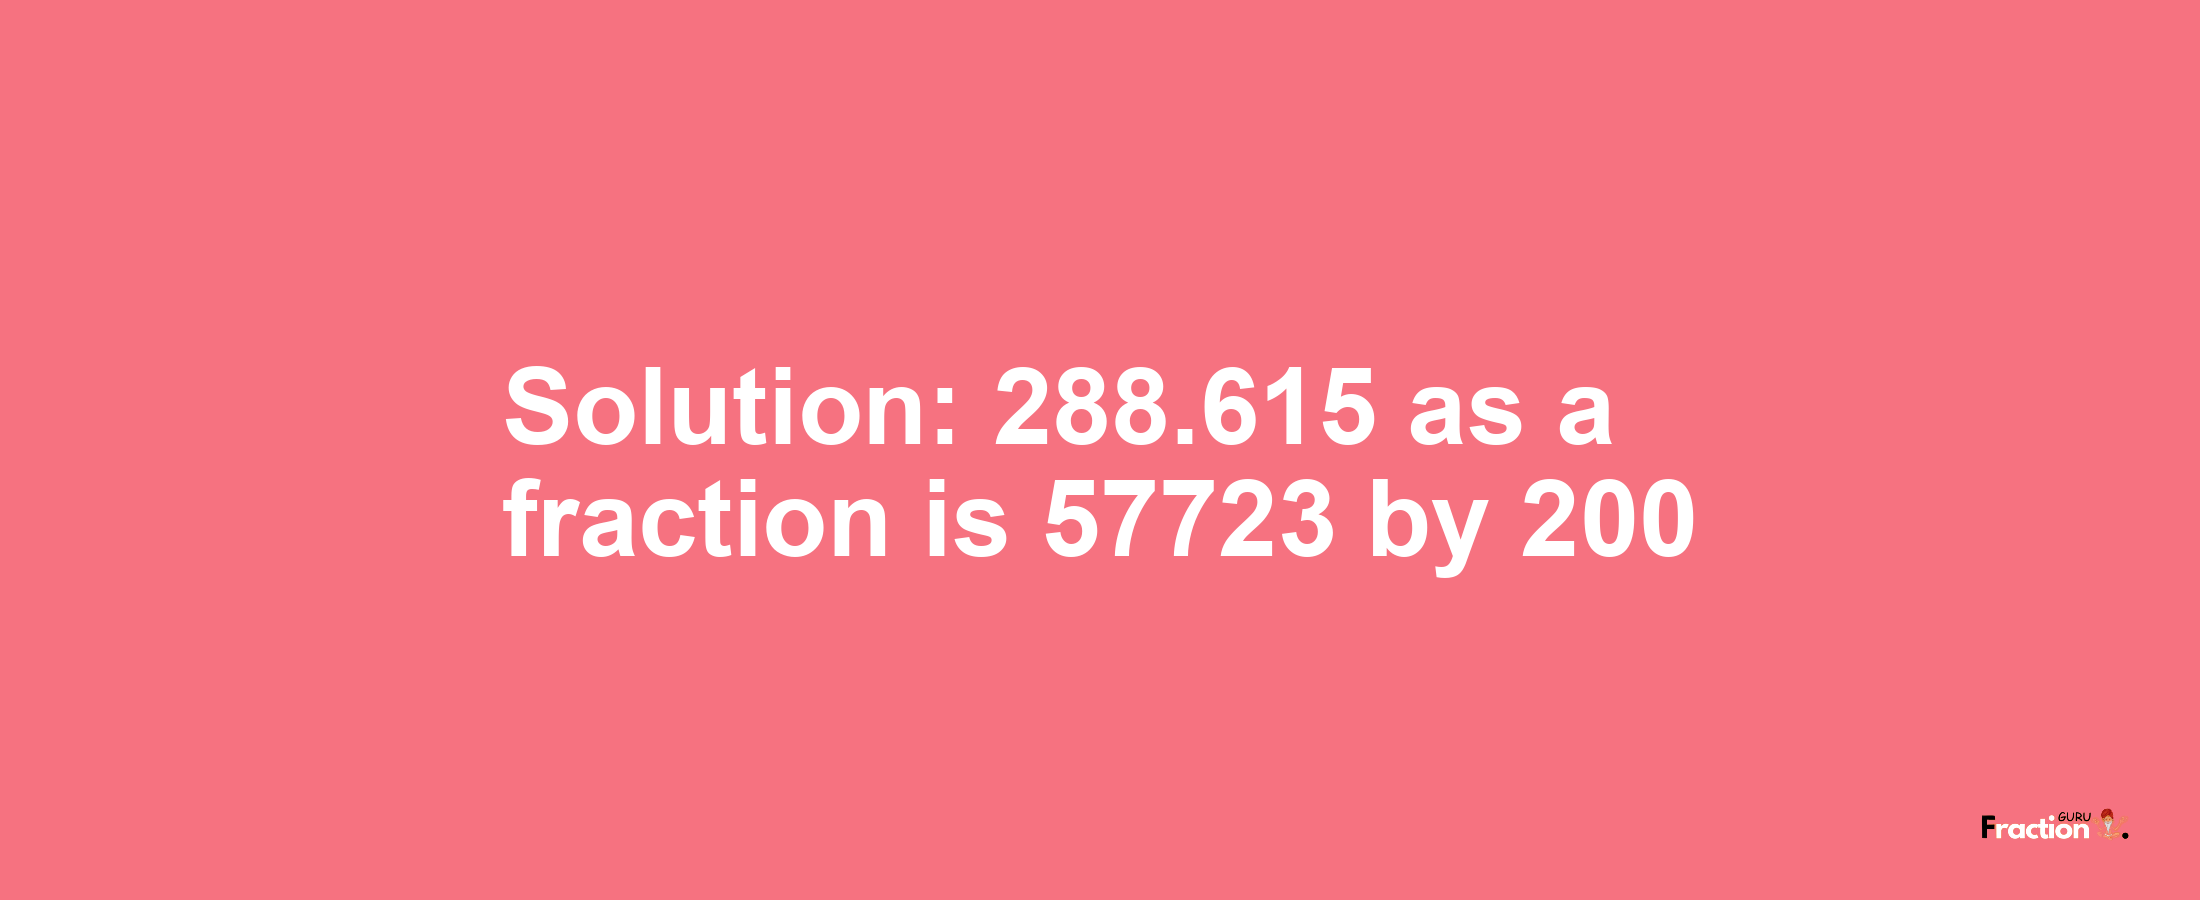 Solution:288.615 as a fraction is 57723/200